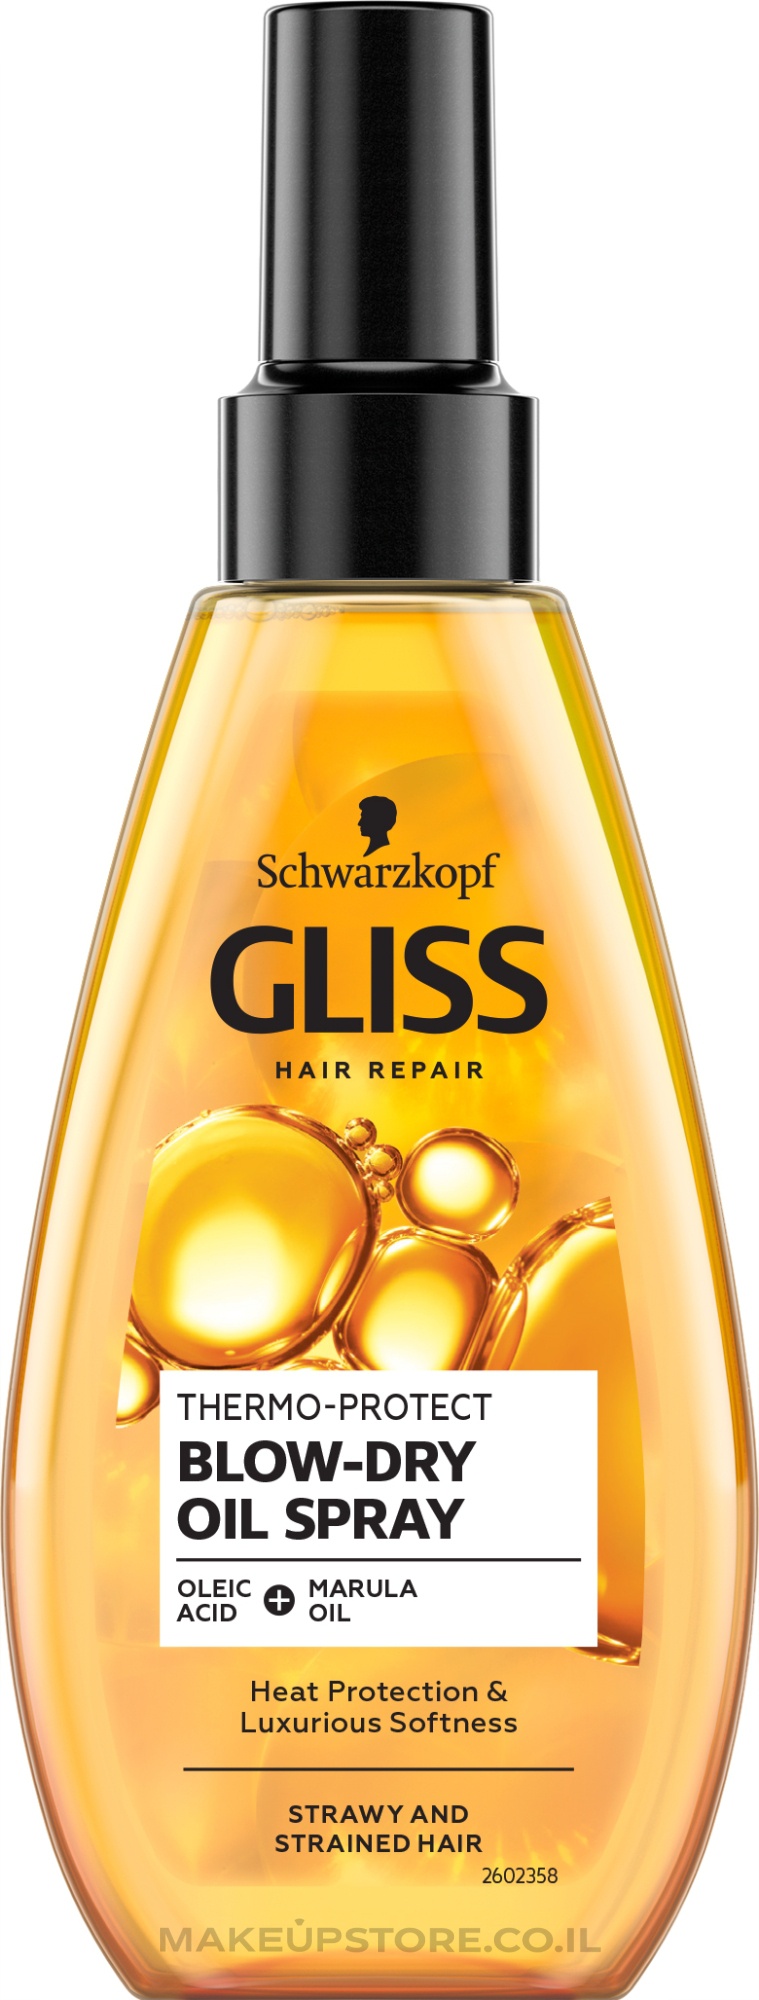 Gliss Kur Thermo-protect Blow-dry Oil Spray